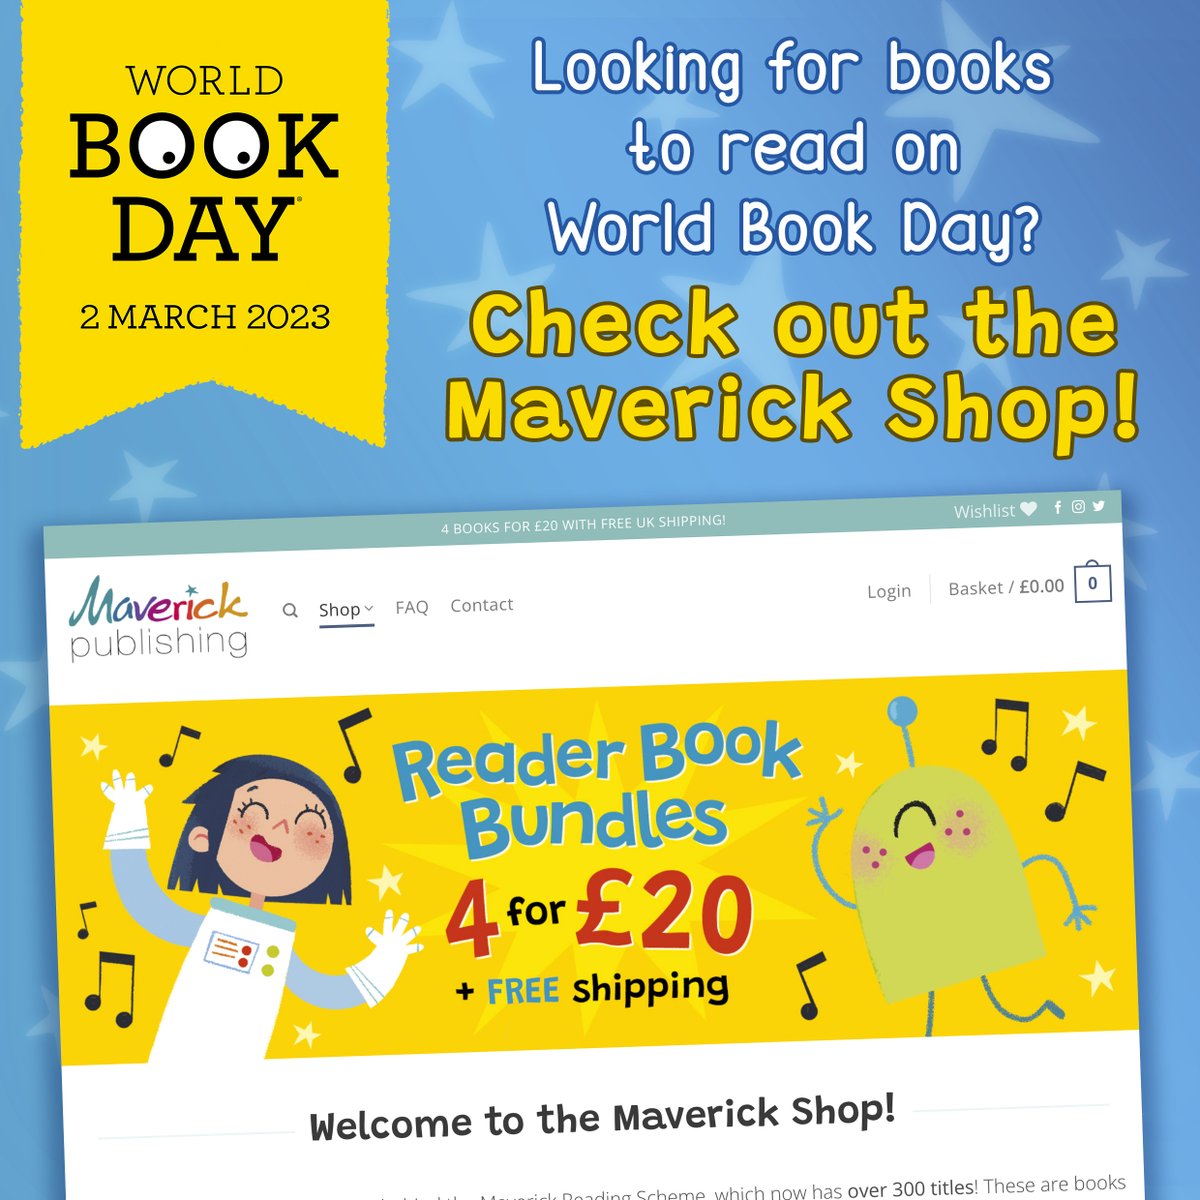 📙 World Book Day is coming soon!
If you're looking for some new books to join in the fun, check out our shop - shop.maverickbooks.co.uk! 
You can buy any 4 Readers for just £20, with free shipping!

#worldbookday #worldbookday2023 #childrensbooks #earlyreaders #chapterreaders